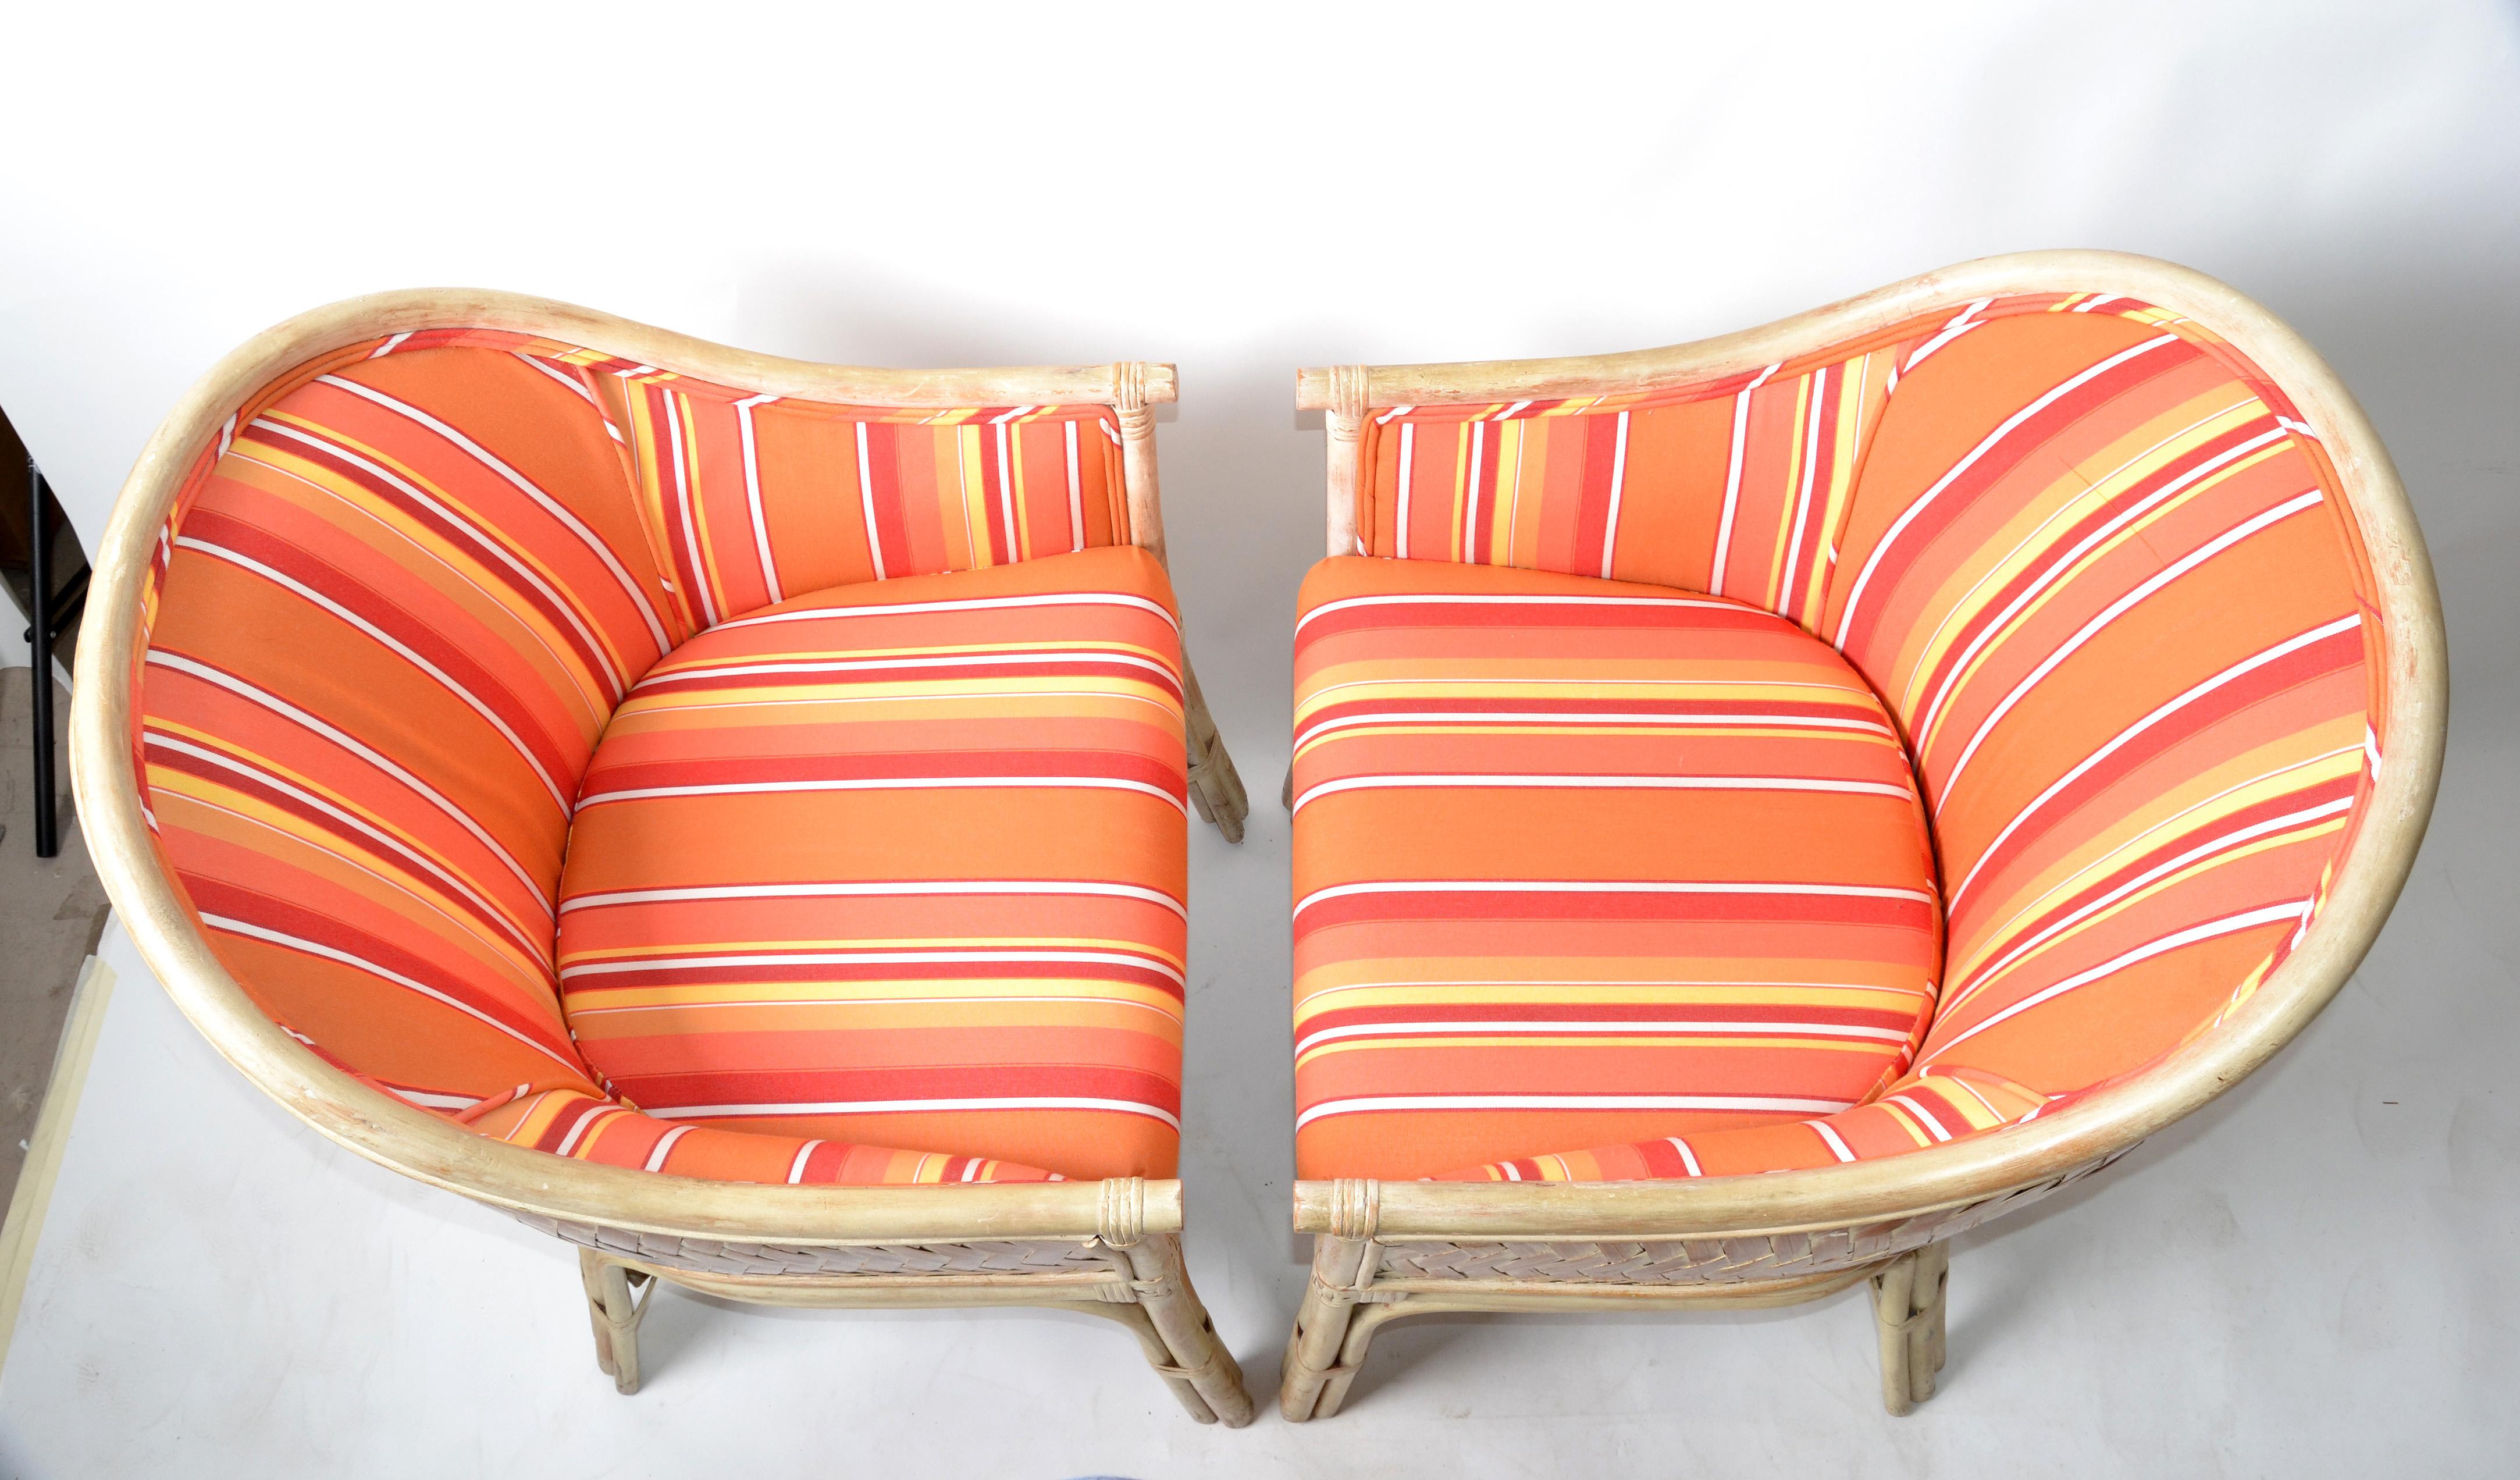 Pair, Mid-Century Modern Bamboo & Cane Armchair Orange Striped Upholstery, 1970 For Sale 3